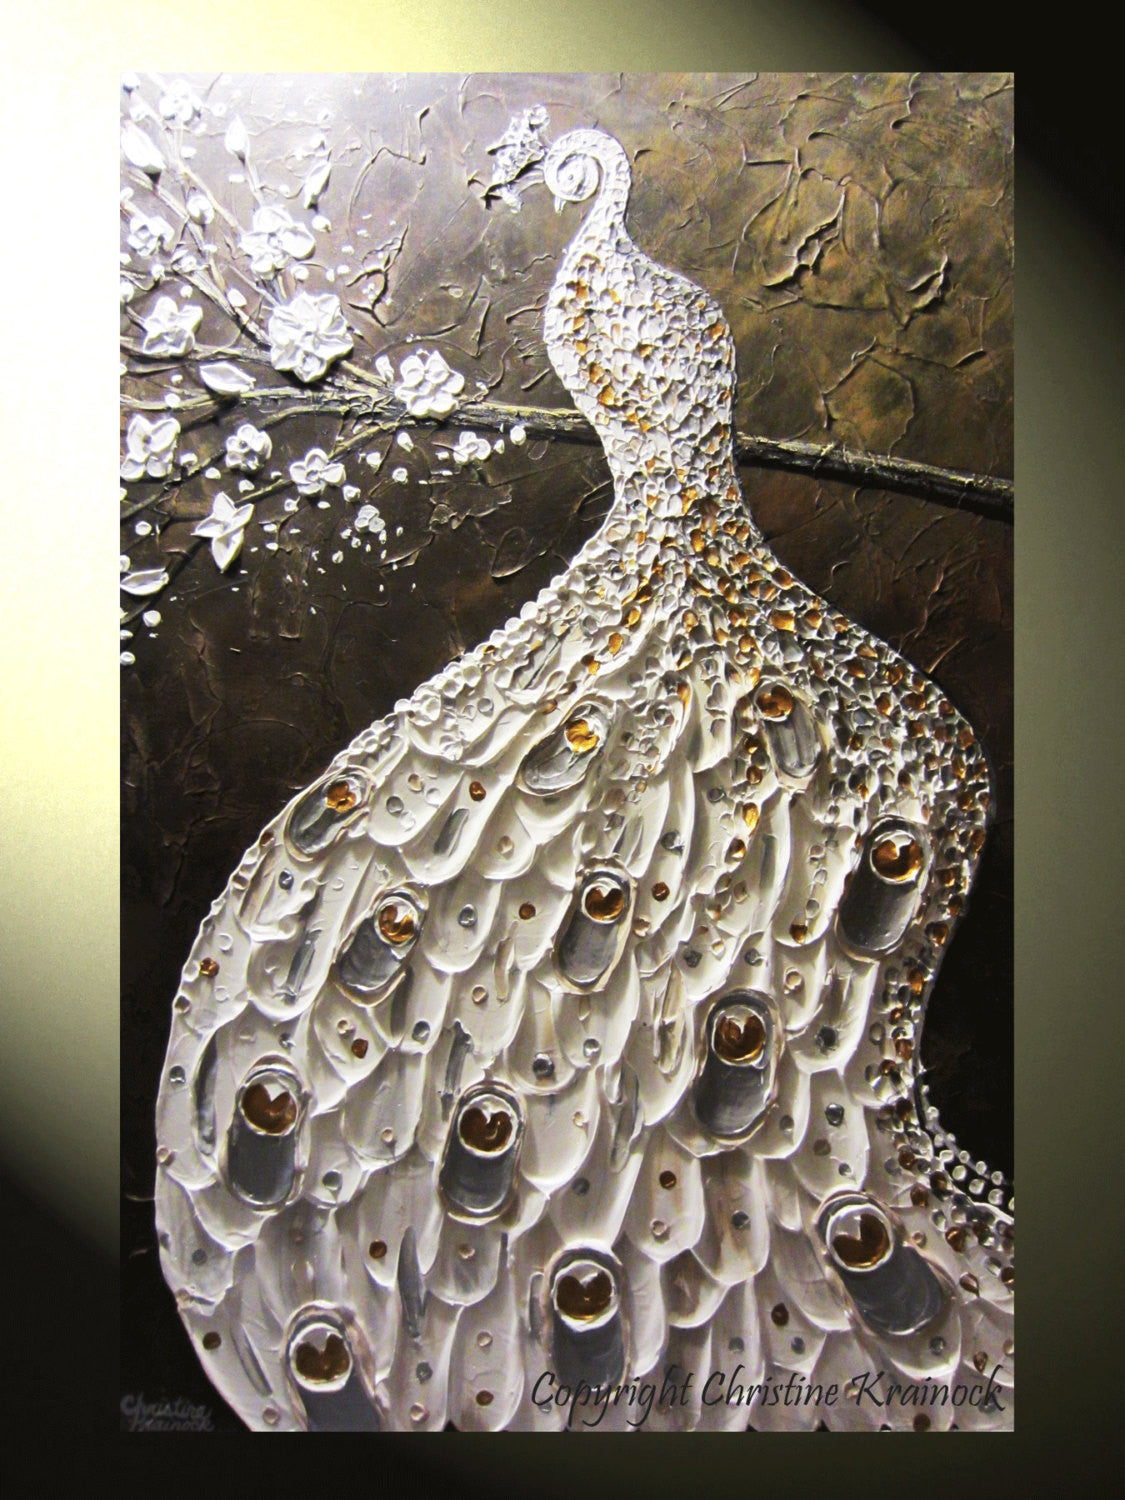 CUSTOM Abstract Peacock Painting White Silver Gold Textured Cherry Blossoms MADE TO ORDER - Christine Krainock Art - Contemporary Art by Christine - 2